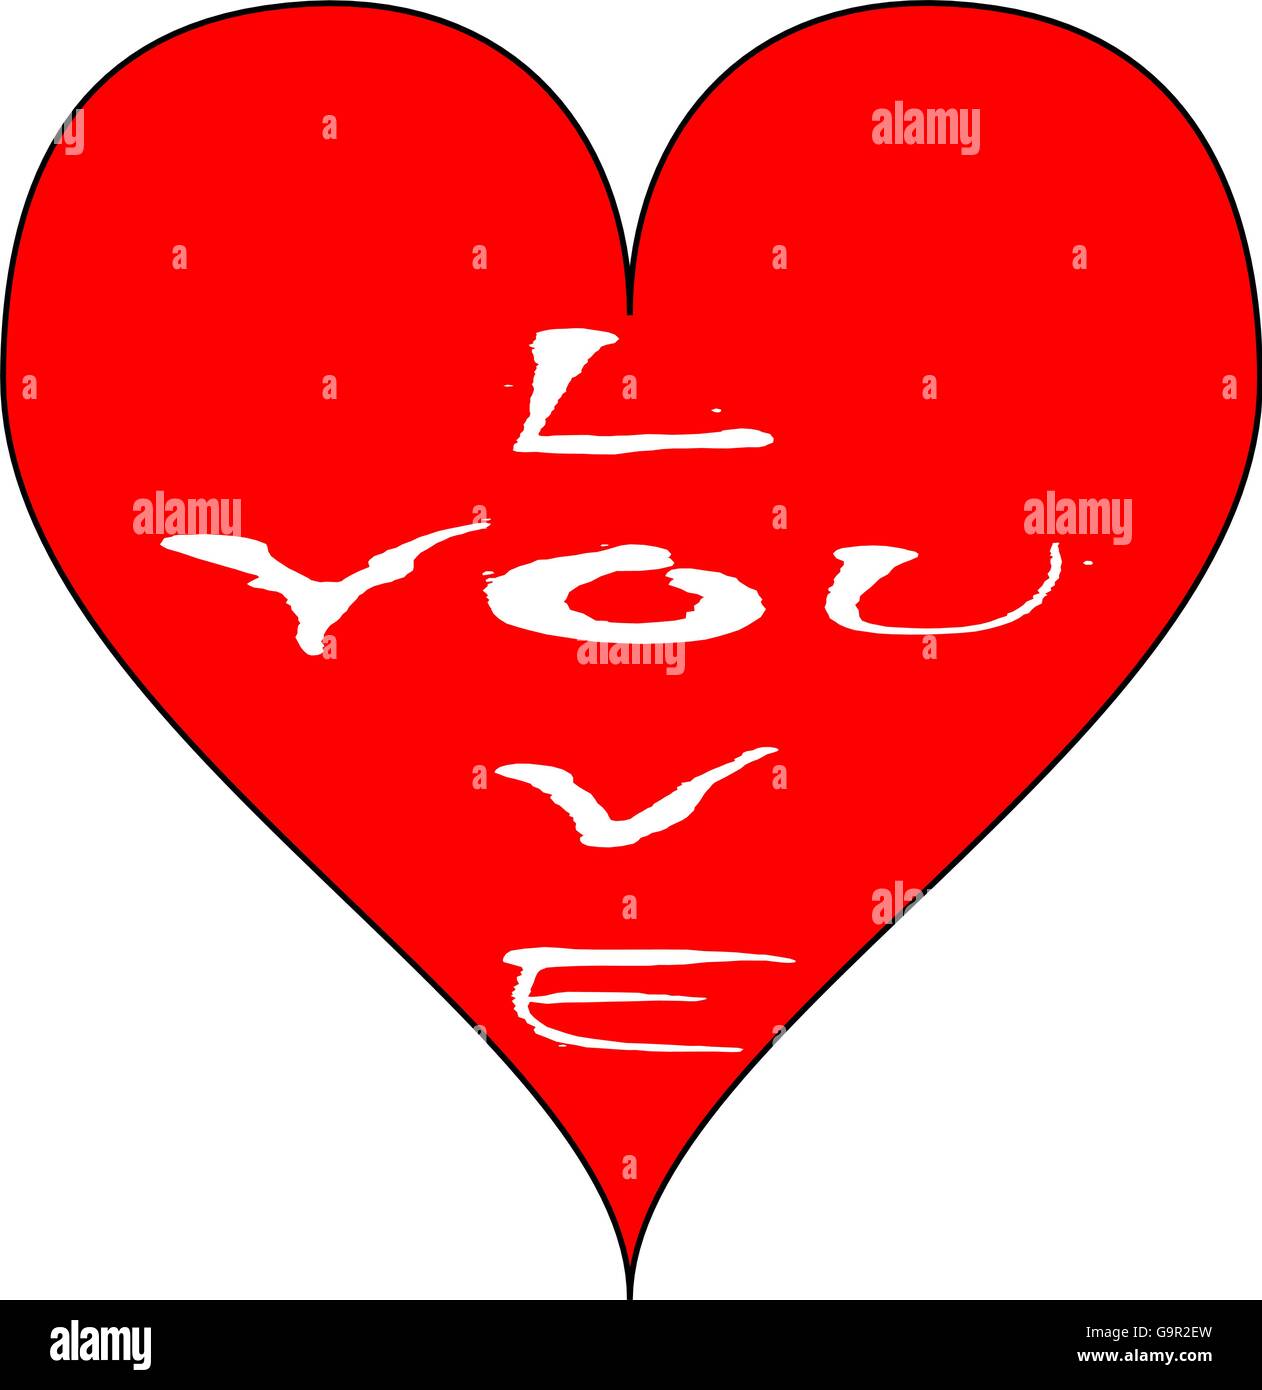 Simple red heart. 'Love you' written inside. Isolated over a white background. Vector. Stock Vector